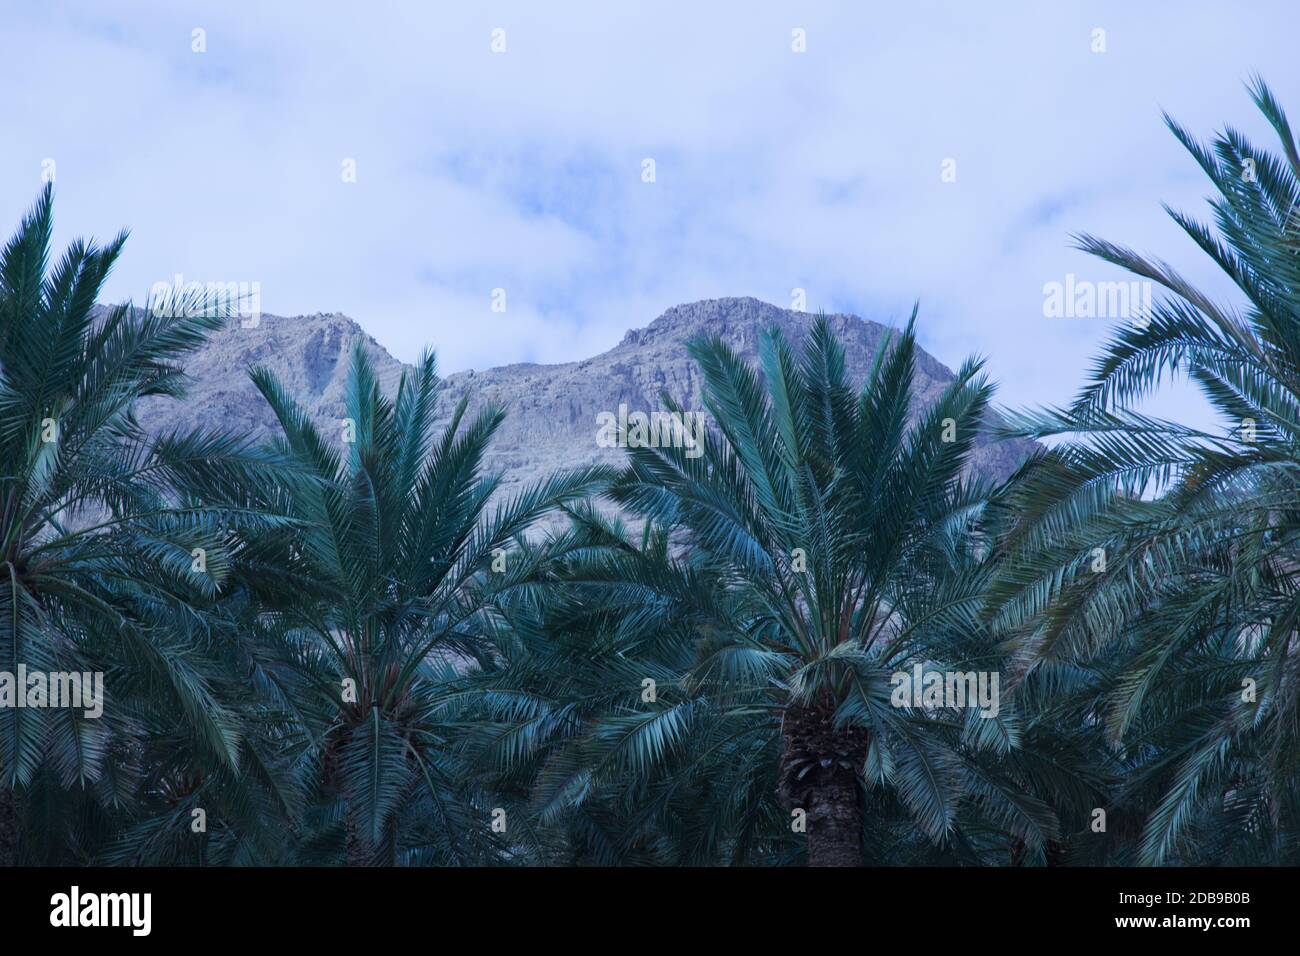 Palm trees against a mountain of stone Stock Photo